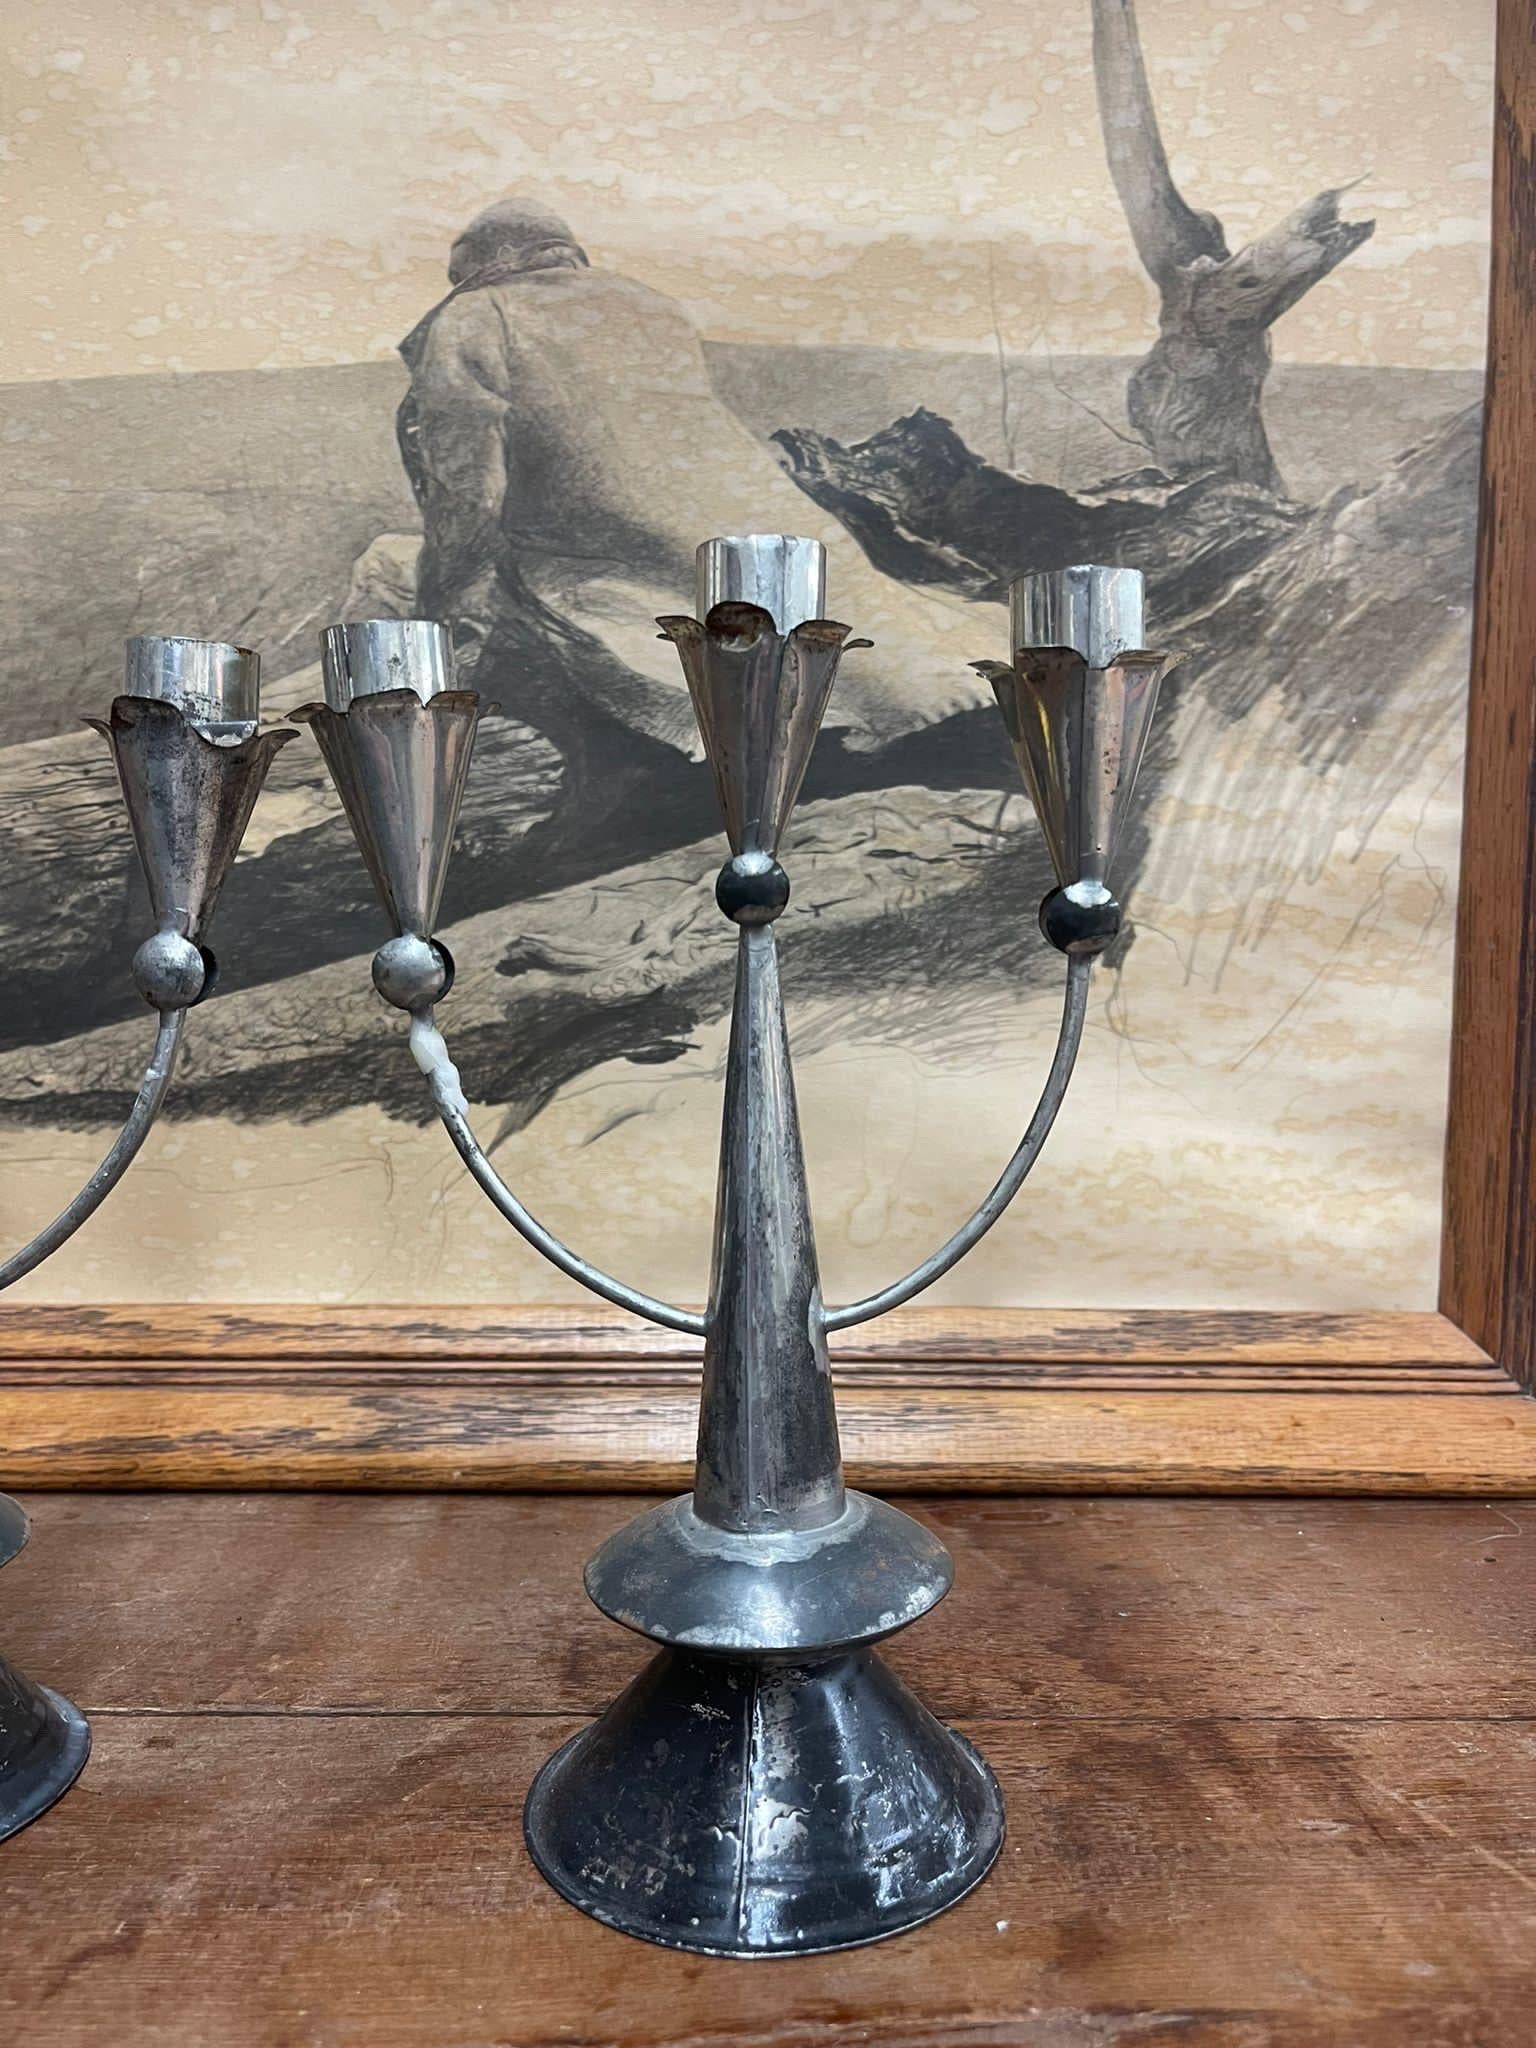 Pair of 3 Arm Candelabras. Beautiful Petina and Aging. Weighted in the Base. Vintage Condition Consistent with Age as Pictured. 

Dimensions. 7 W ; 4 D ; 9 H